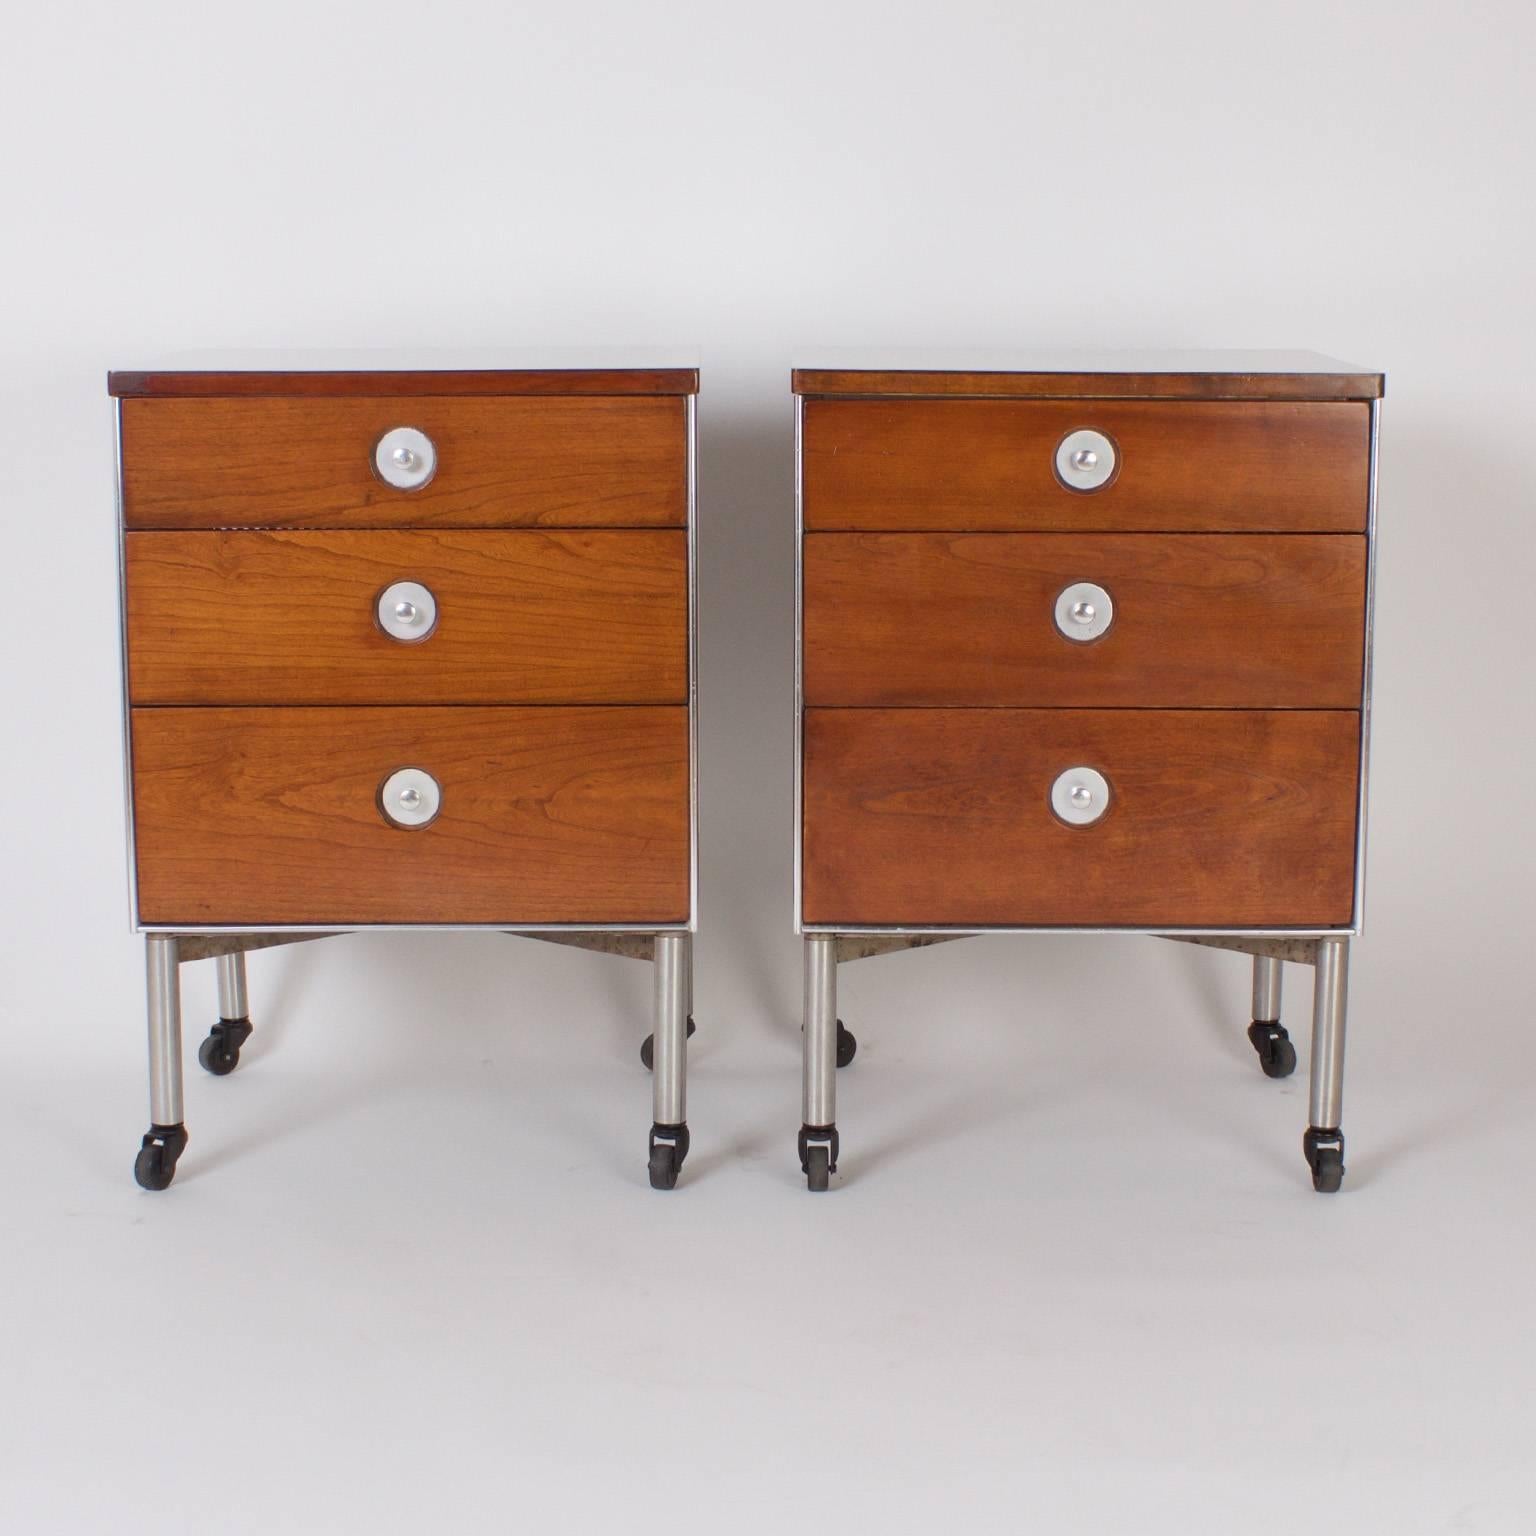 Dashing pair of three-drawer nightstands or chests that confidently mix textures of walnut with aluminum and influences of Mid-Century modern with Industrial. Designed by Raymond Loewy for Hill-Rom as labeled in a drawer.

  